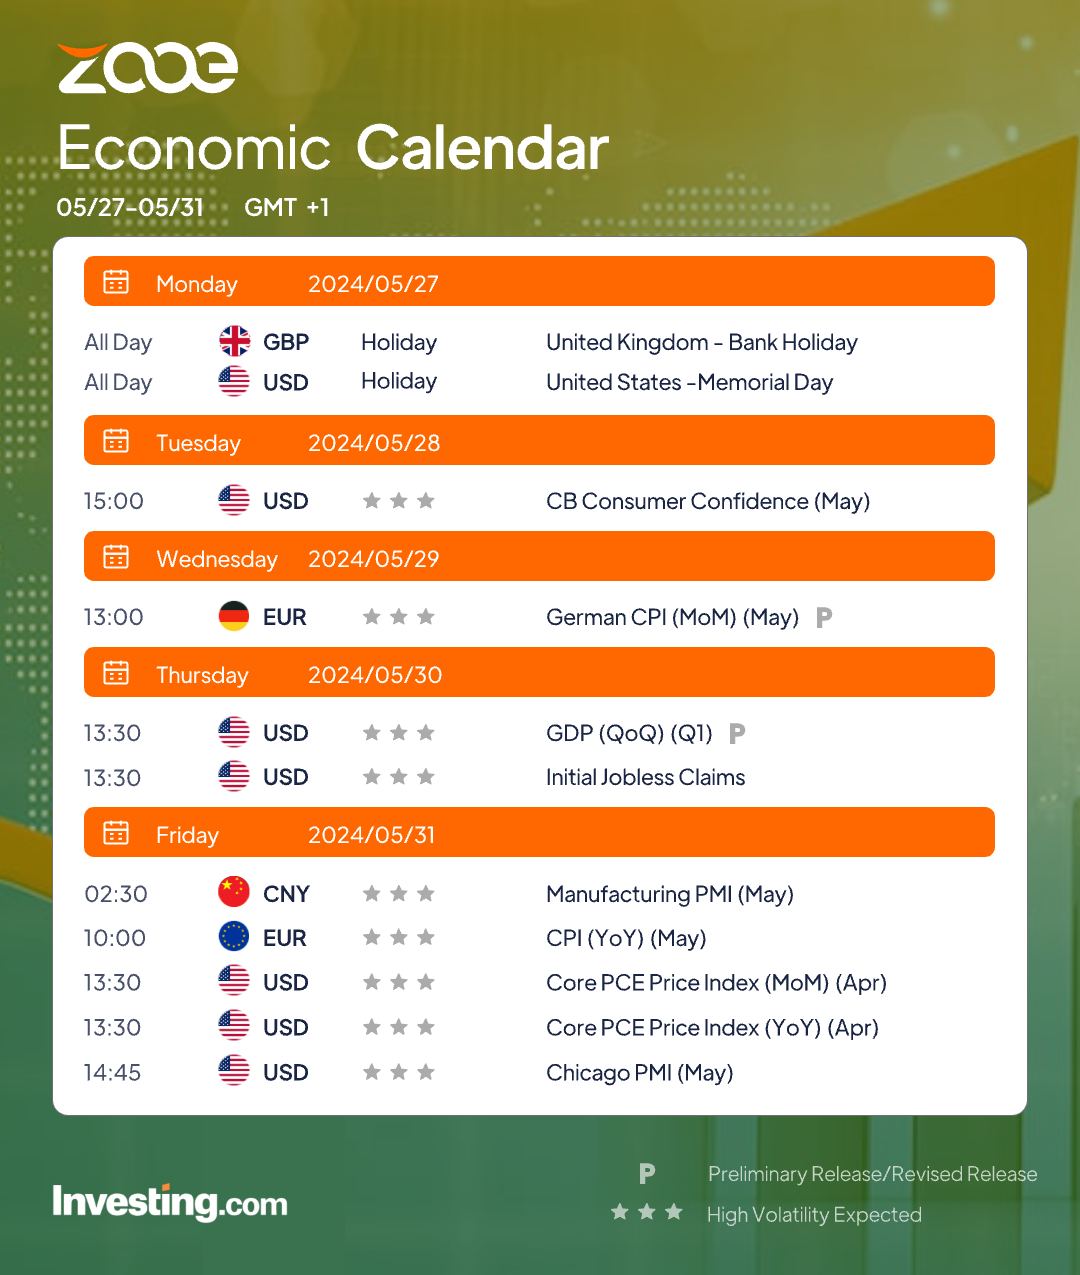 ZOOE’s Economic Calendar Preview: May 27-31, 2024